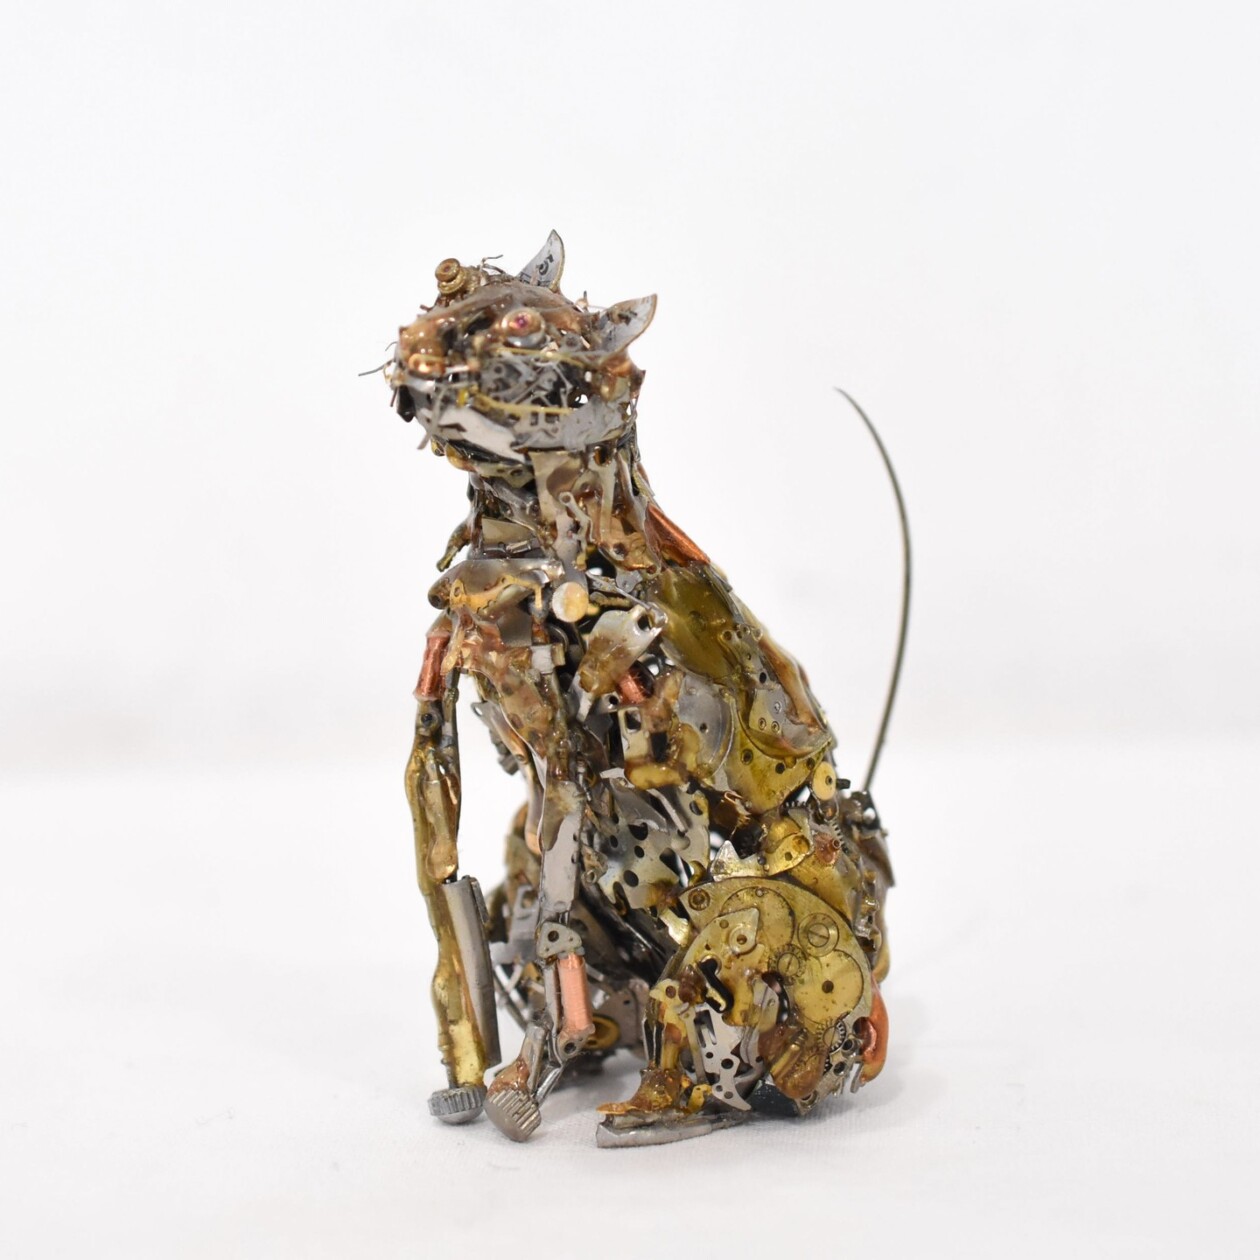 Spare Parts Of Clocks And Glasses Upcycled Into Incredible Animal Sculptures By Megane Tokei Ito (14)